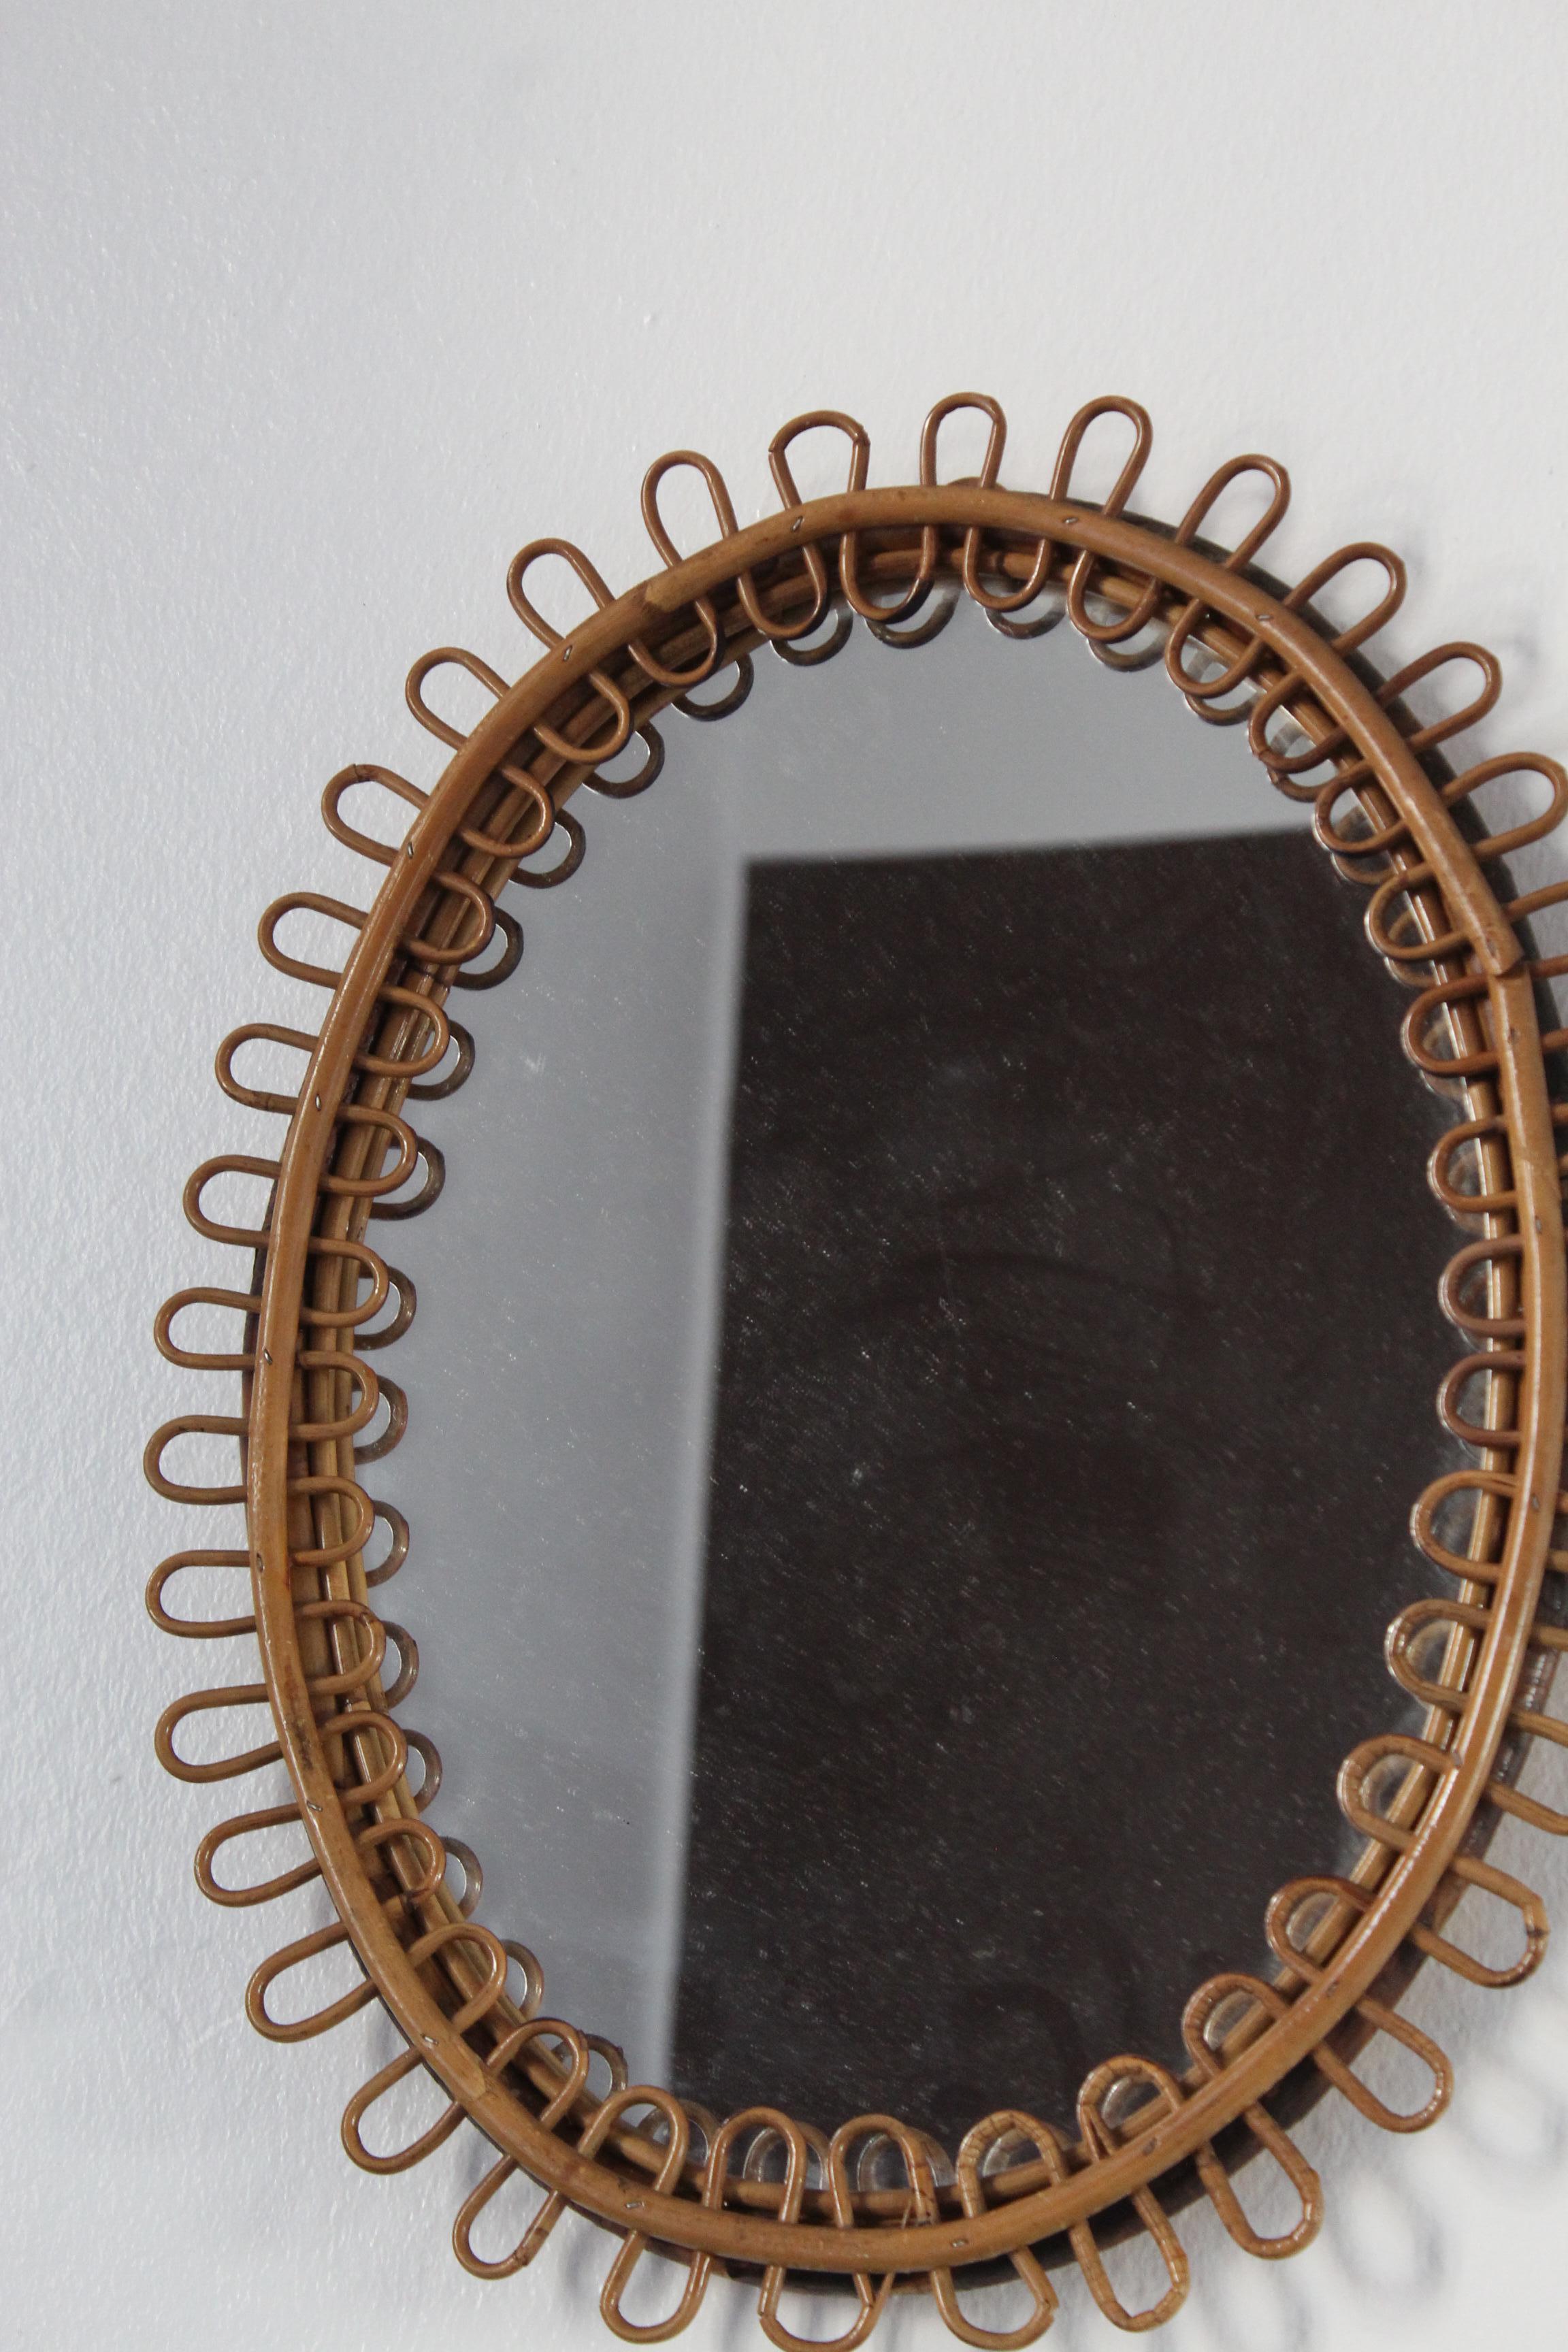 A wall mirror, produced in Italy, 1950s. Cut mirror glass is framed in bamboo and rattan.

Other designers of the period include Gio Ponti, Fontana Arte, Max Ingrand, Franco Albini, and Josef Frank.